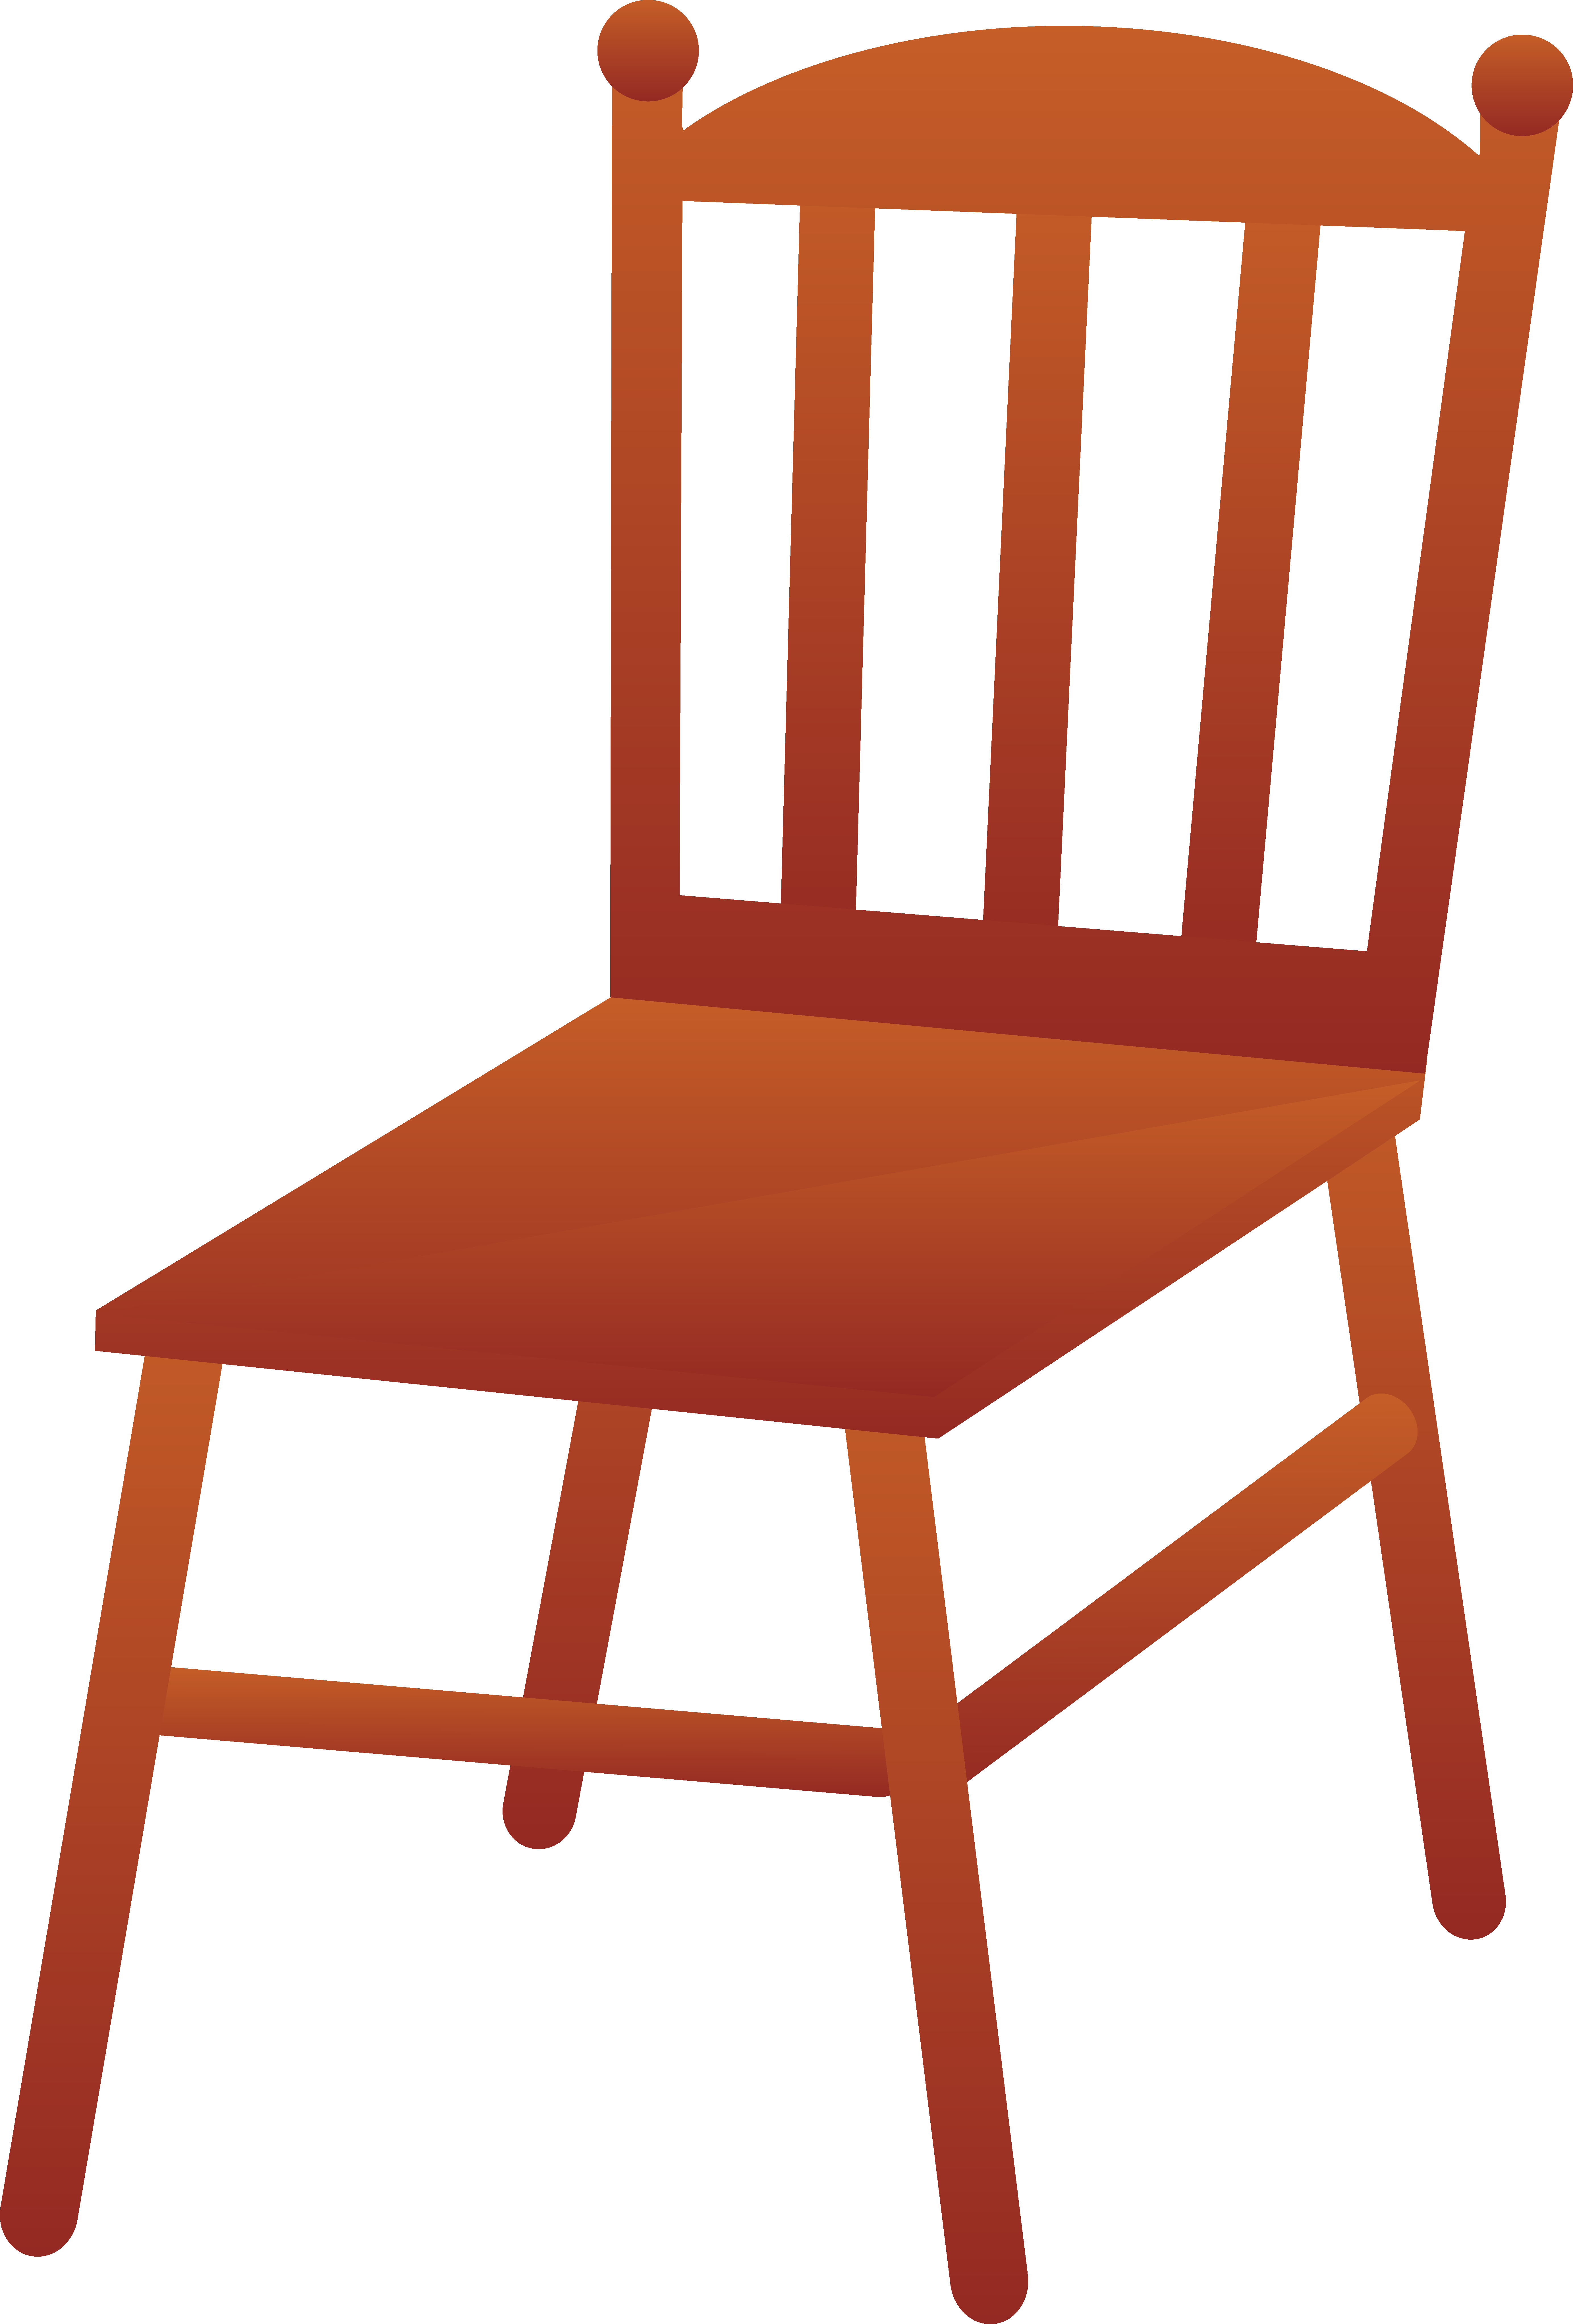 Brown wooden chair.